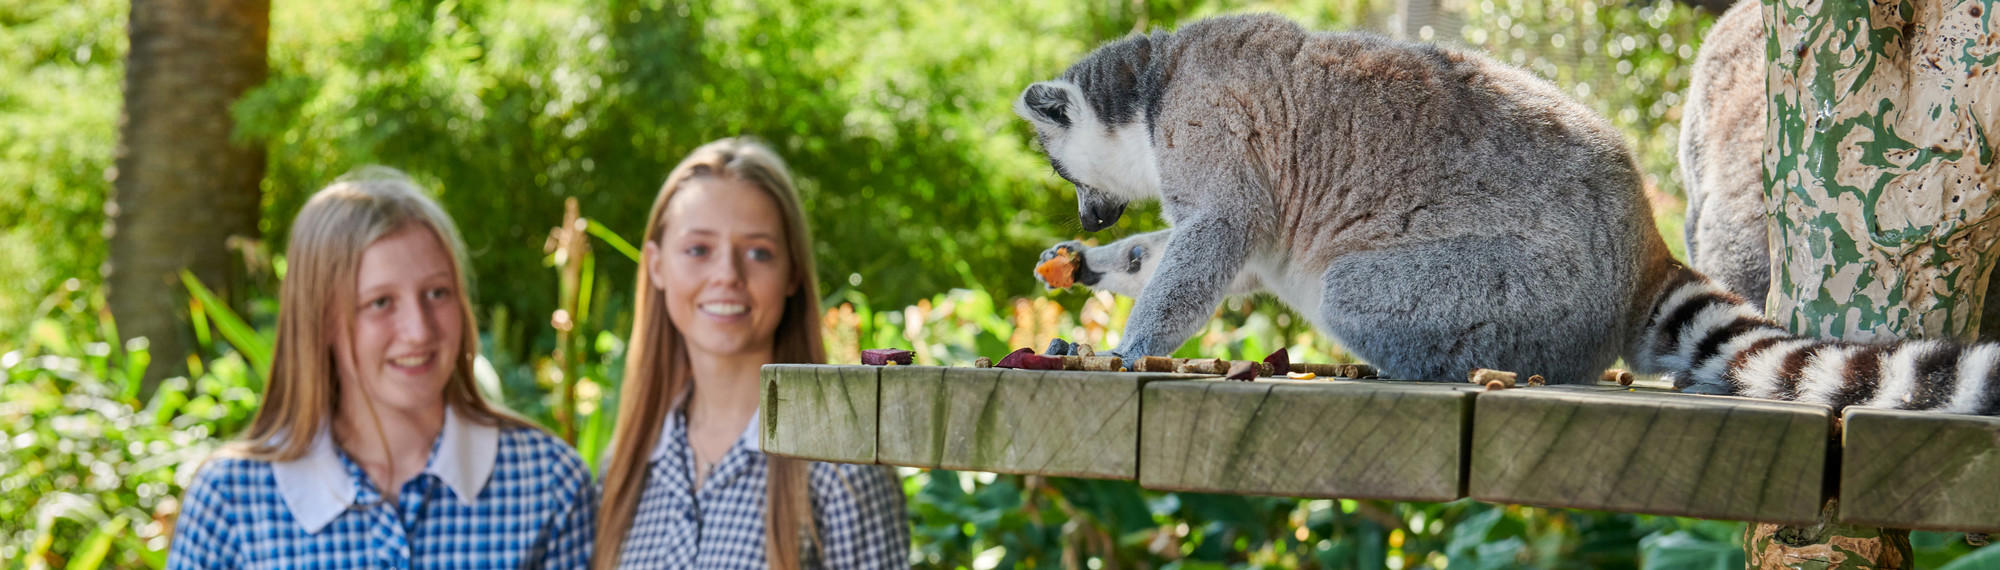 Two teen school girls dressed in blue chequered uniforms smile as they look at a lemur who is eating a piece of fruit on a platform.